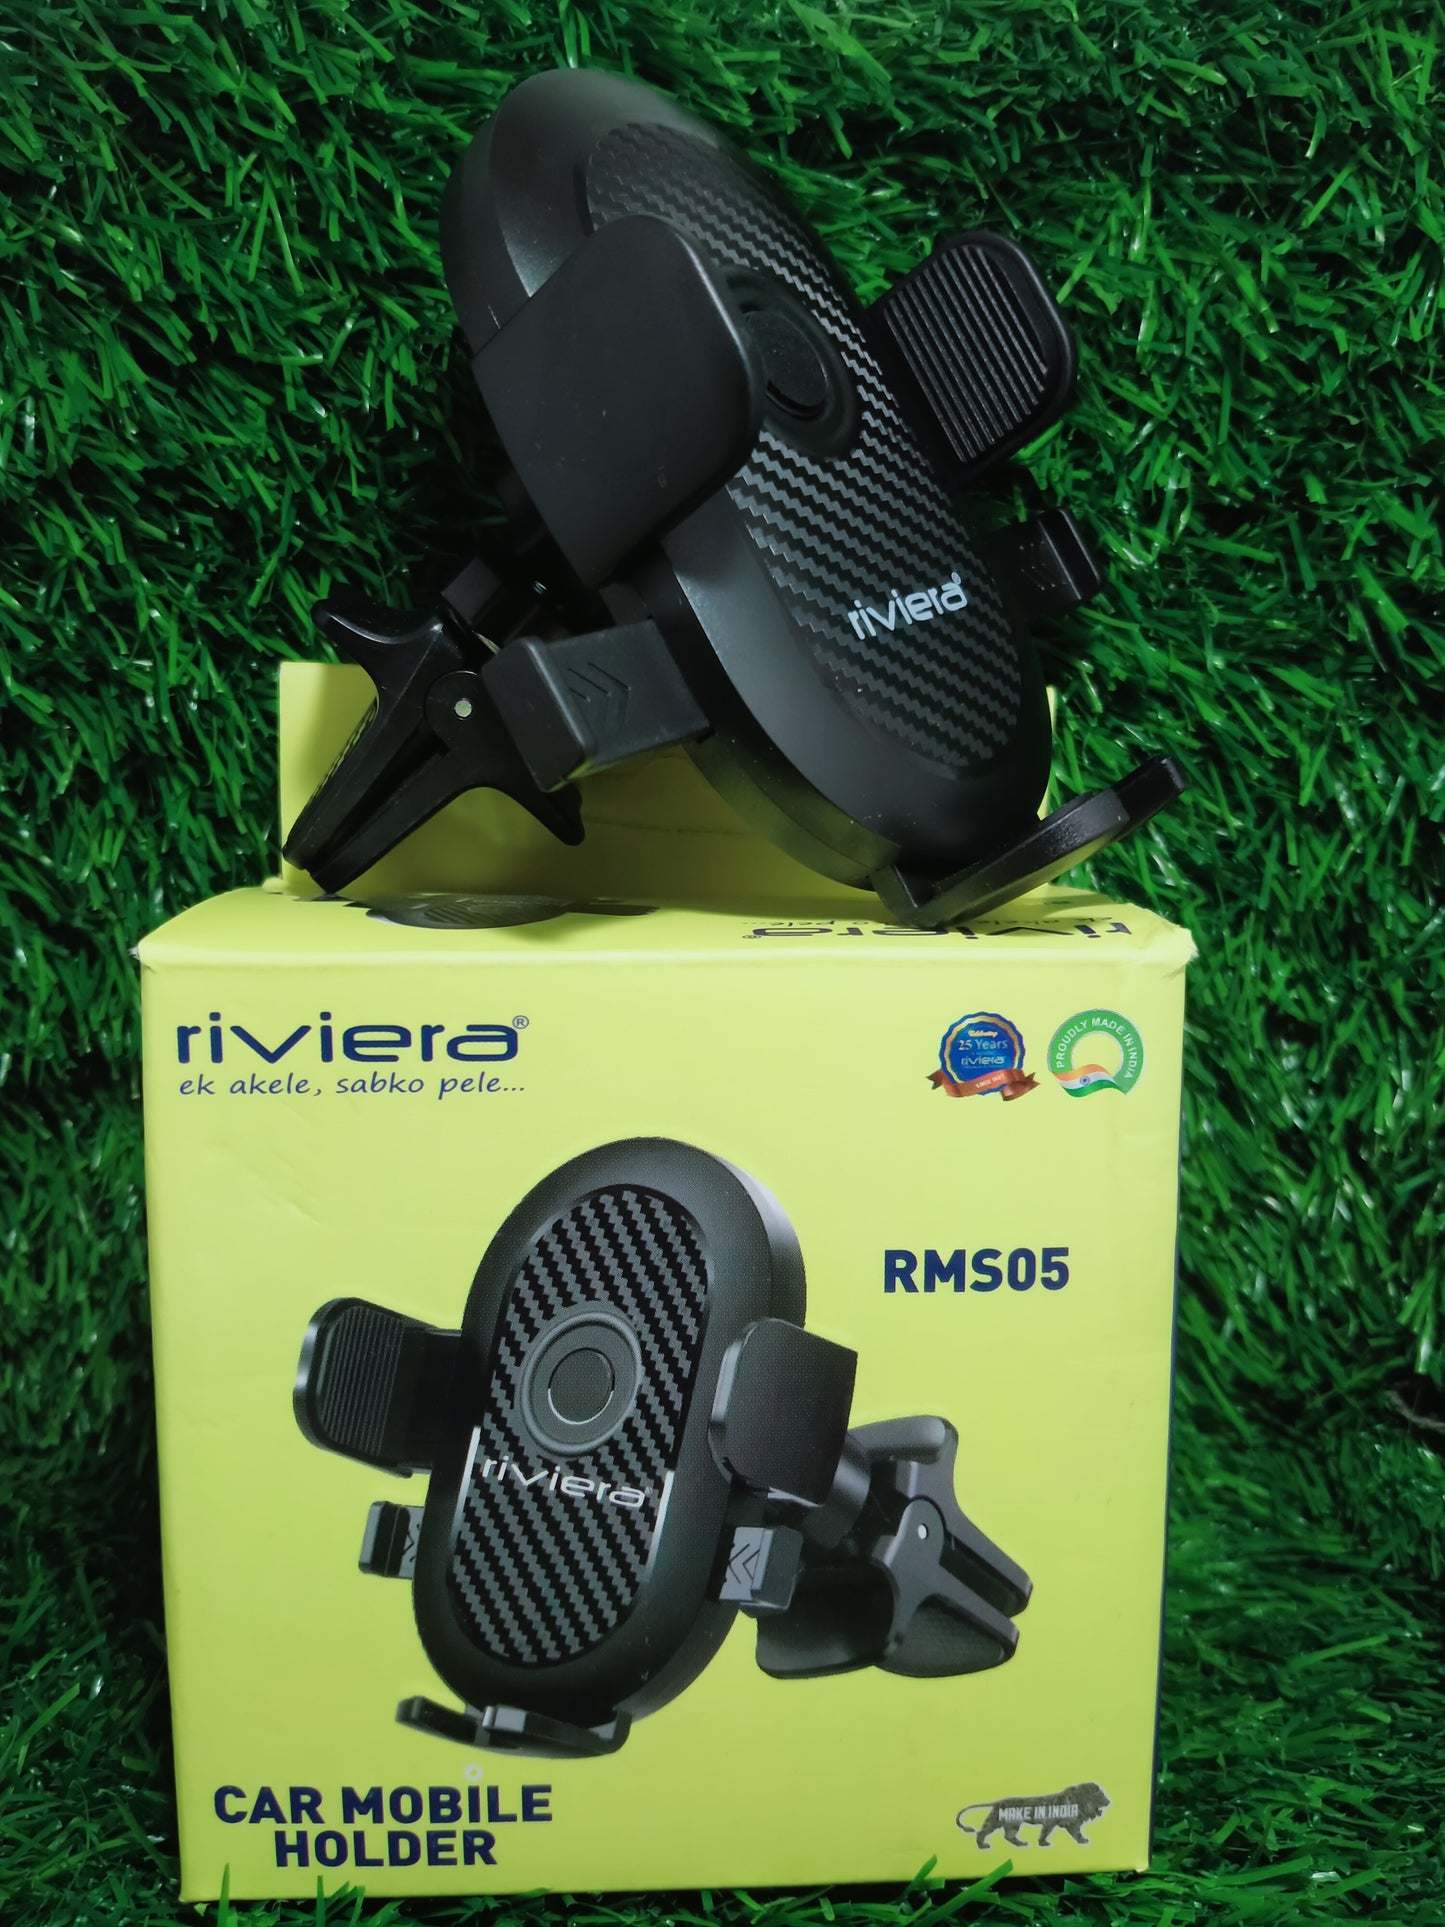 riviera RMS05 CAR MOBILE HOLDER